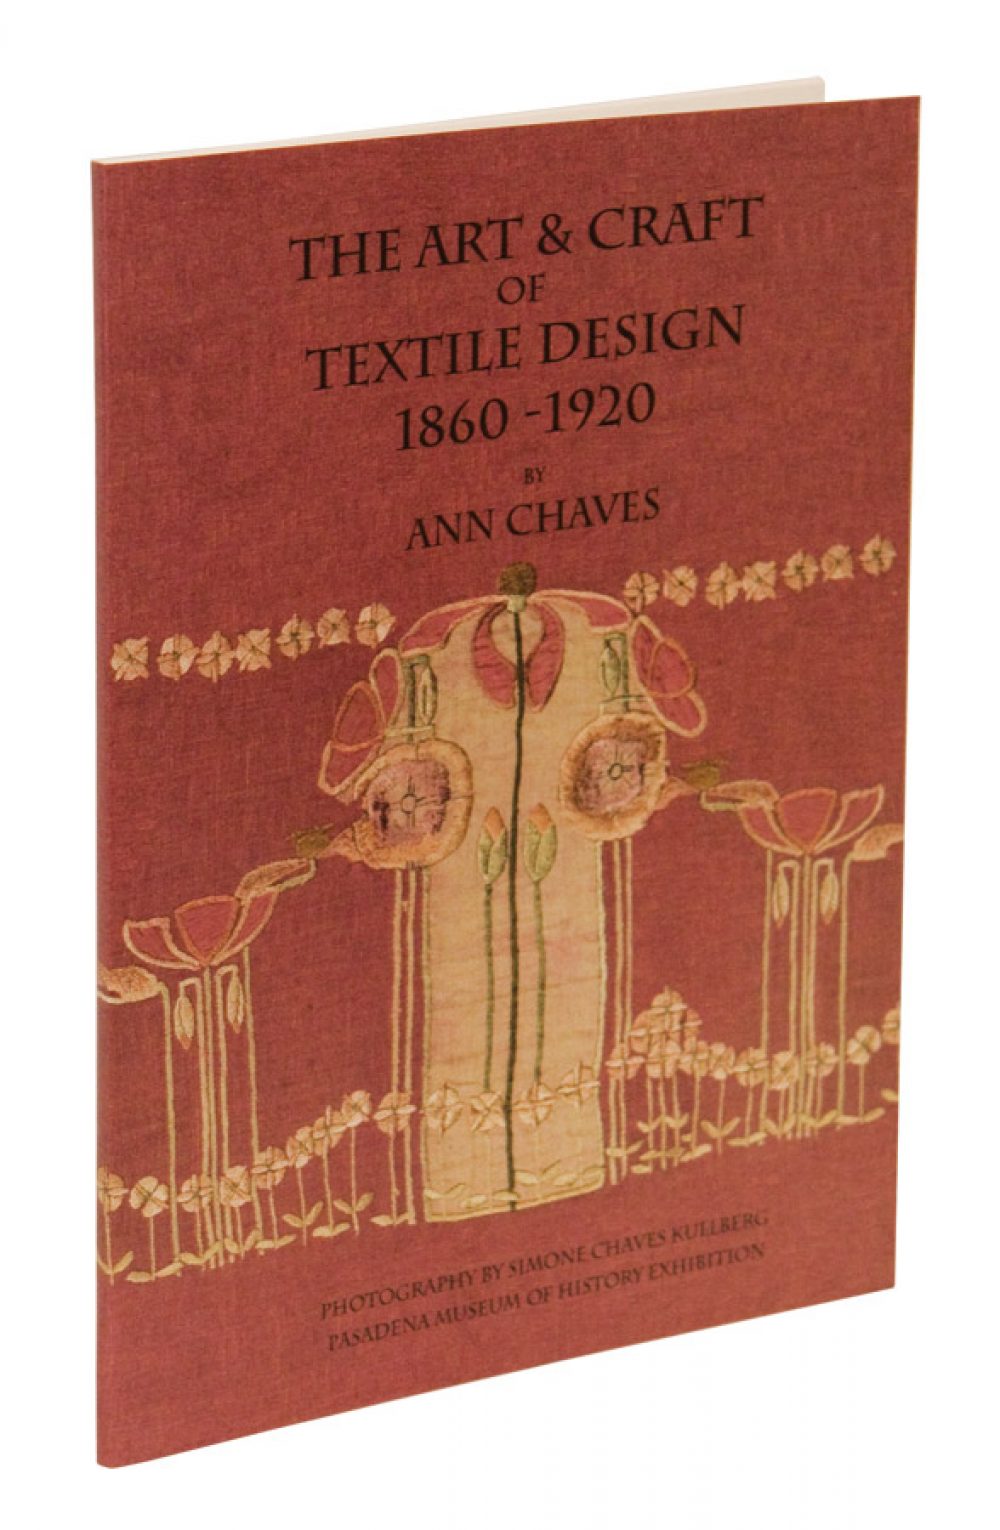 The Art & Craft of Textile Design, 1860-1920 Softcover by Ann Chaves